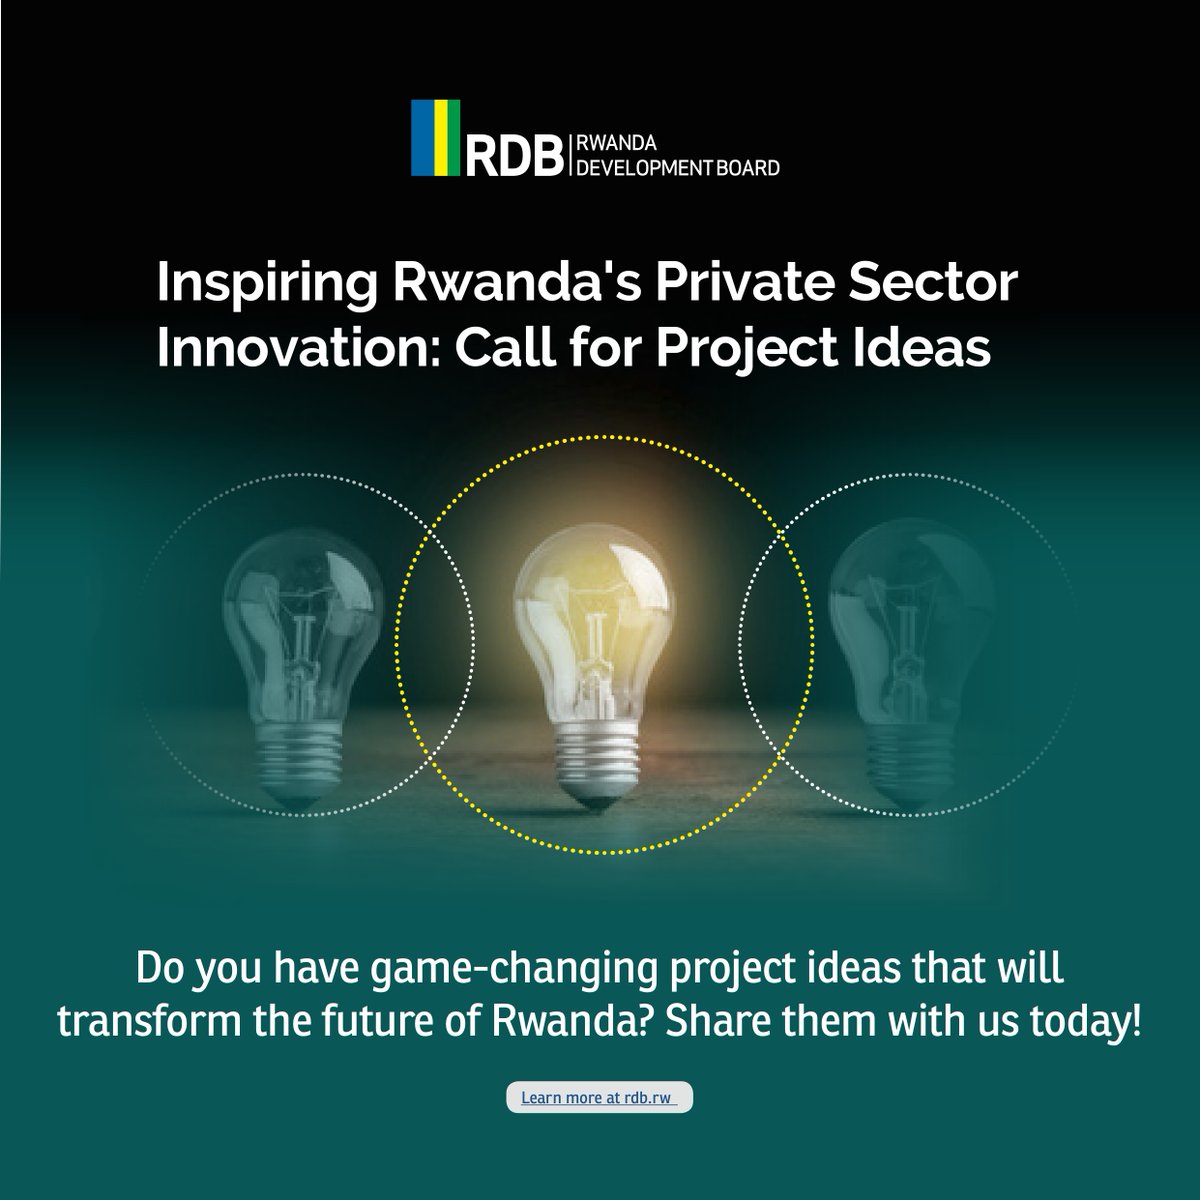 RDB is seeking project ideas that will transform Rwanda's economy in years to come. We are searching for new innovative project ideas that are: 💡Big: Move the needle for the sectors or industries they operate in 💡Bold: Innovate and change the way the private sector operates